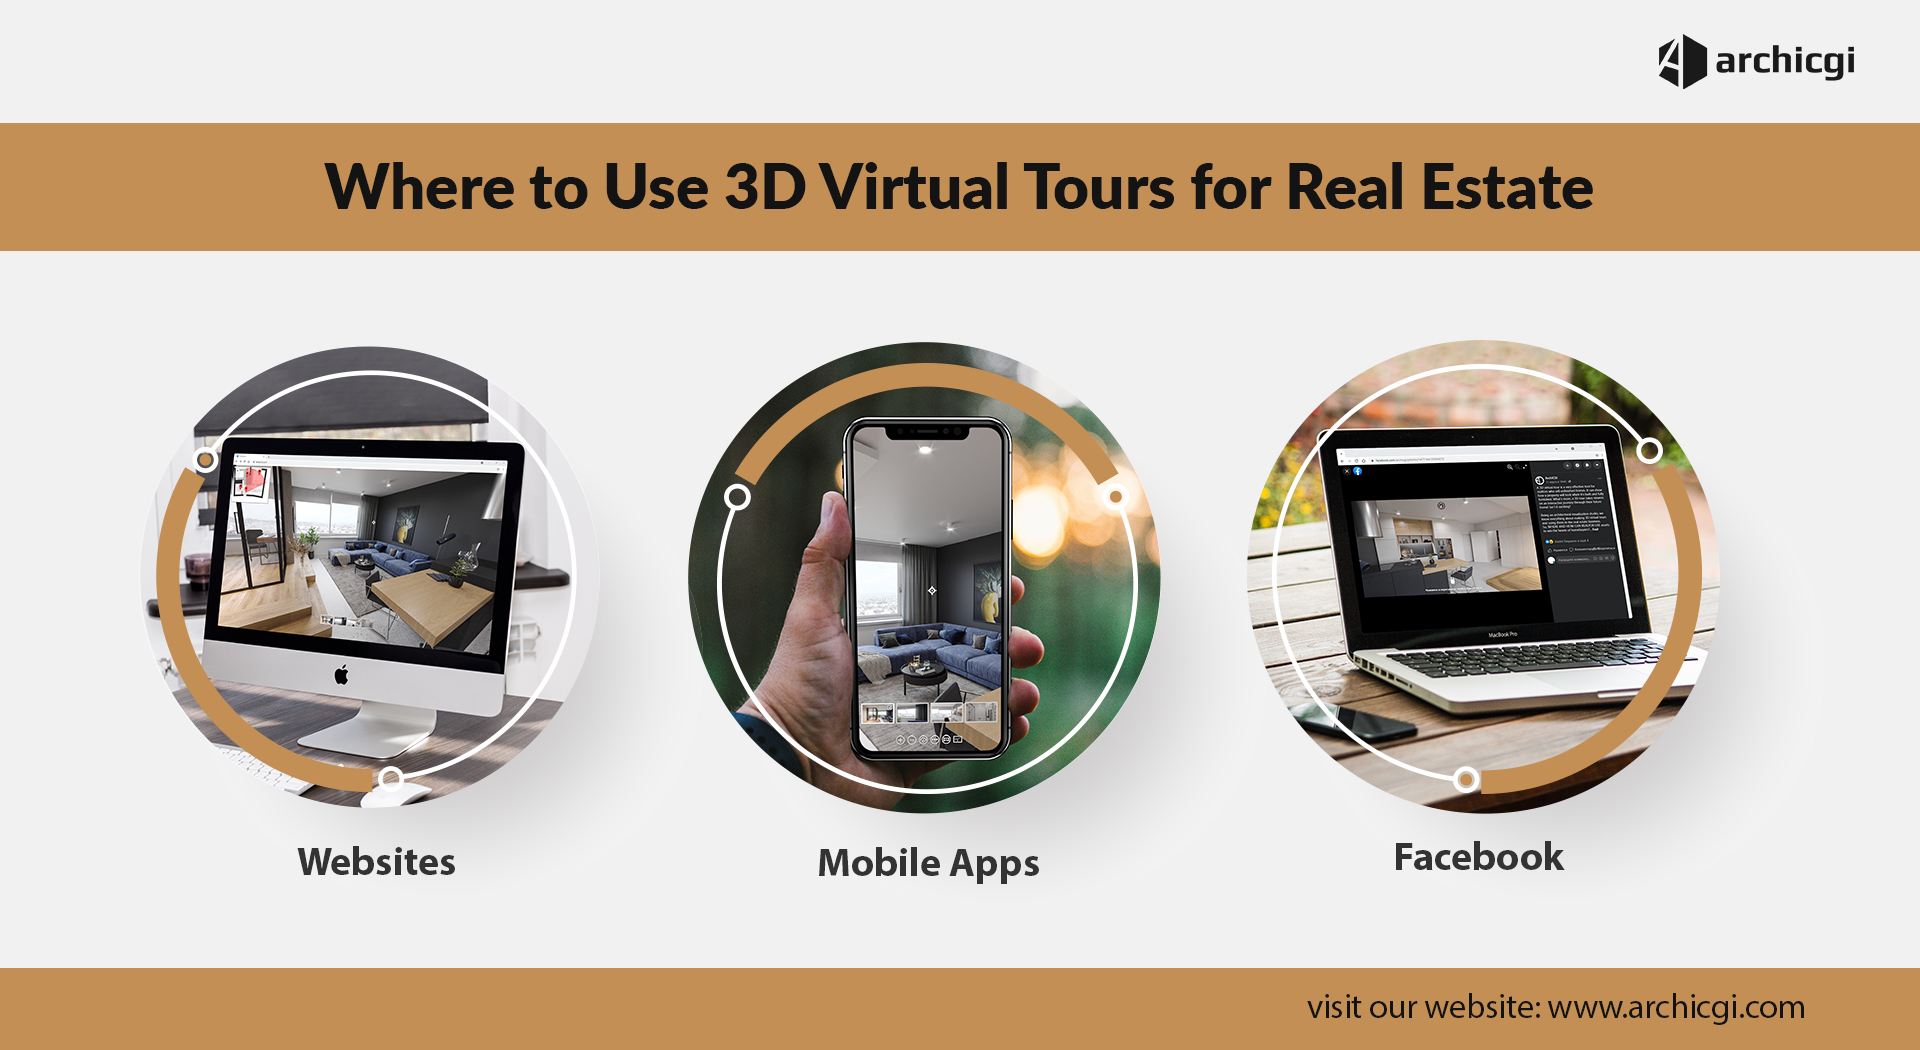 Types of Using 3D Virtual Tours for Realtors